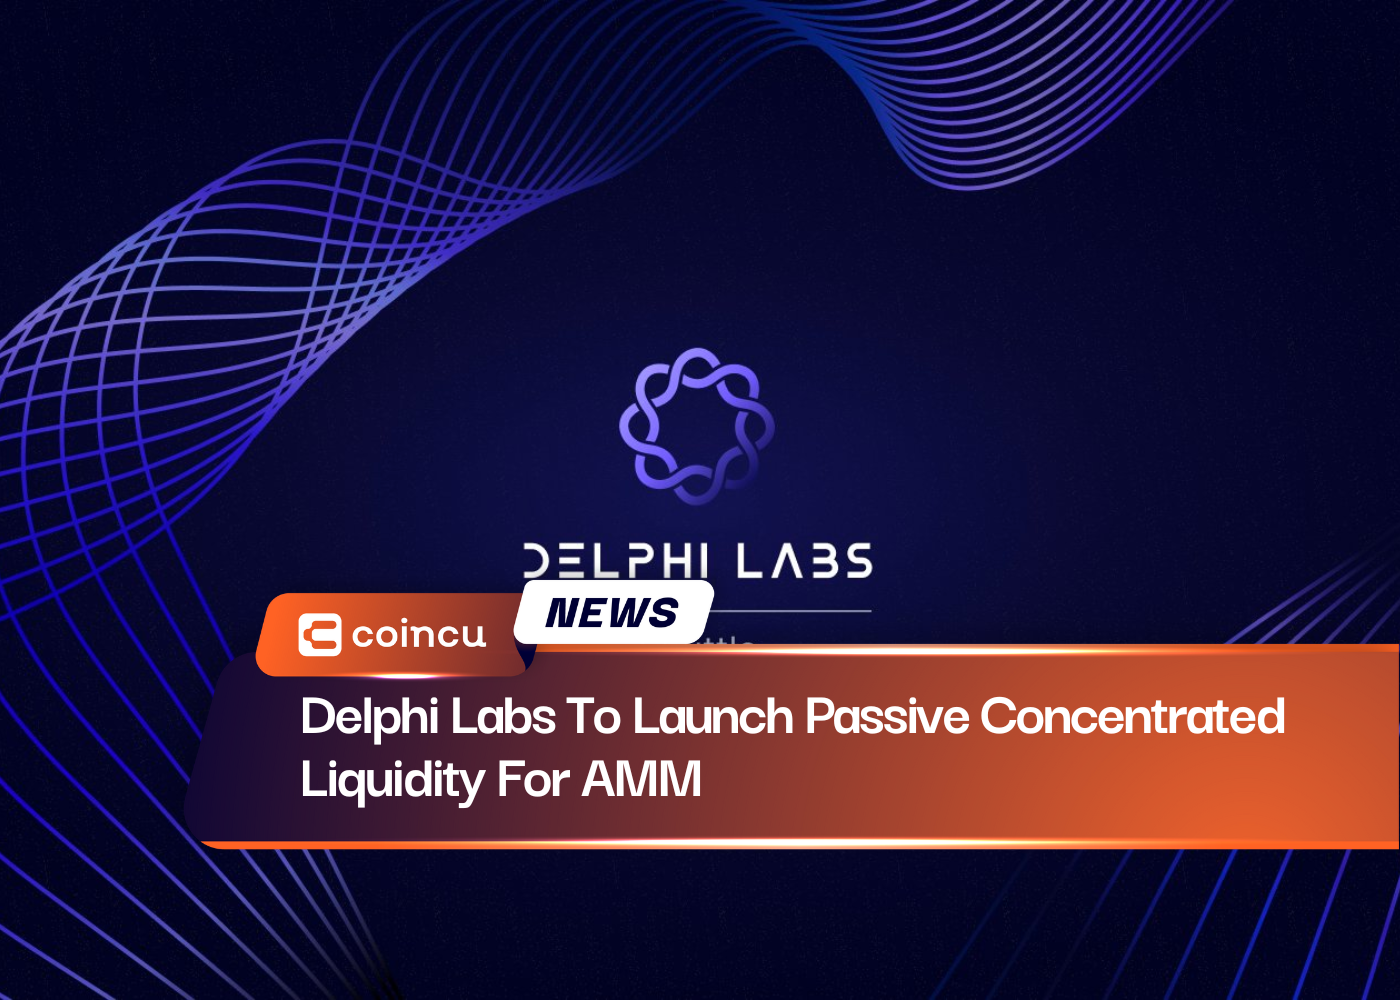 Delphi Labs To Launch Passive Concentrated Liquidity For AMM